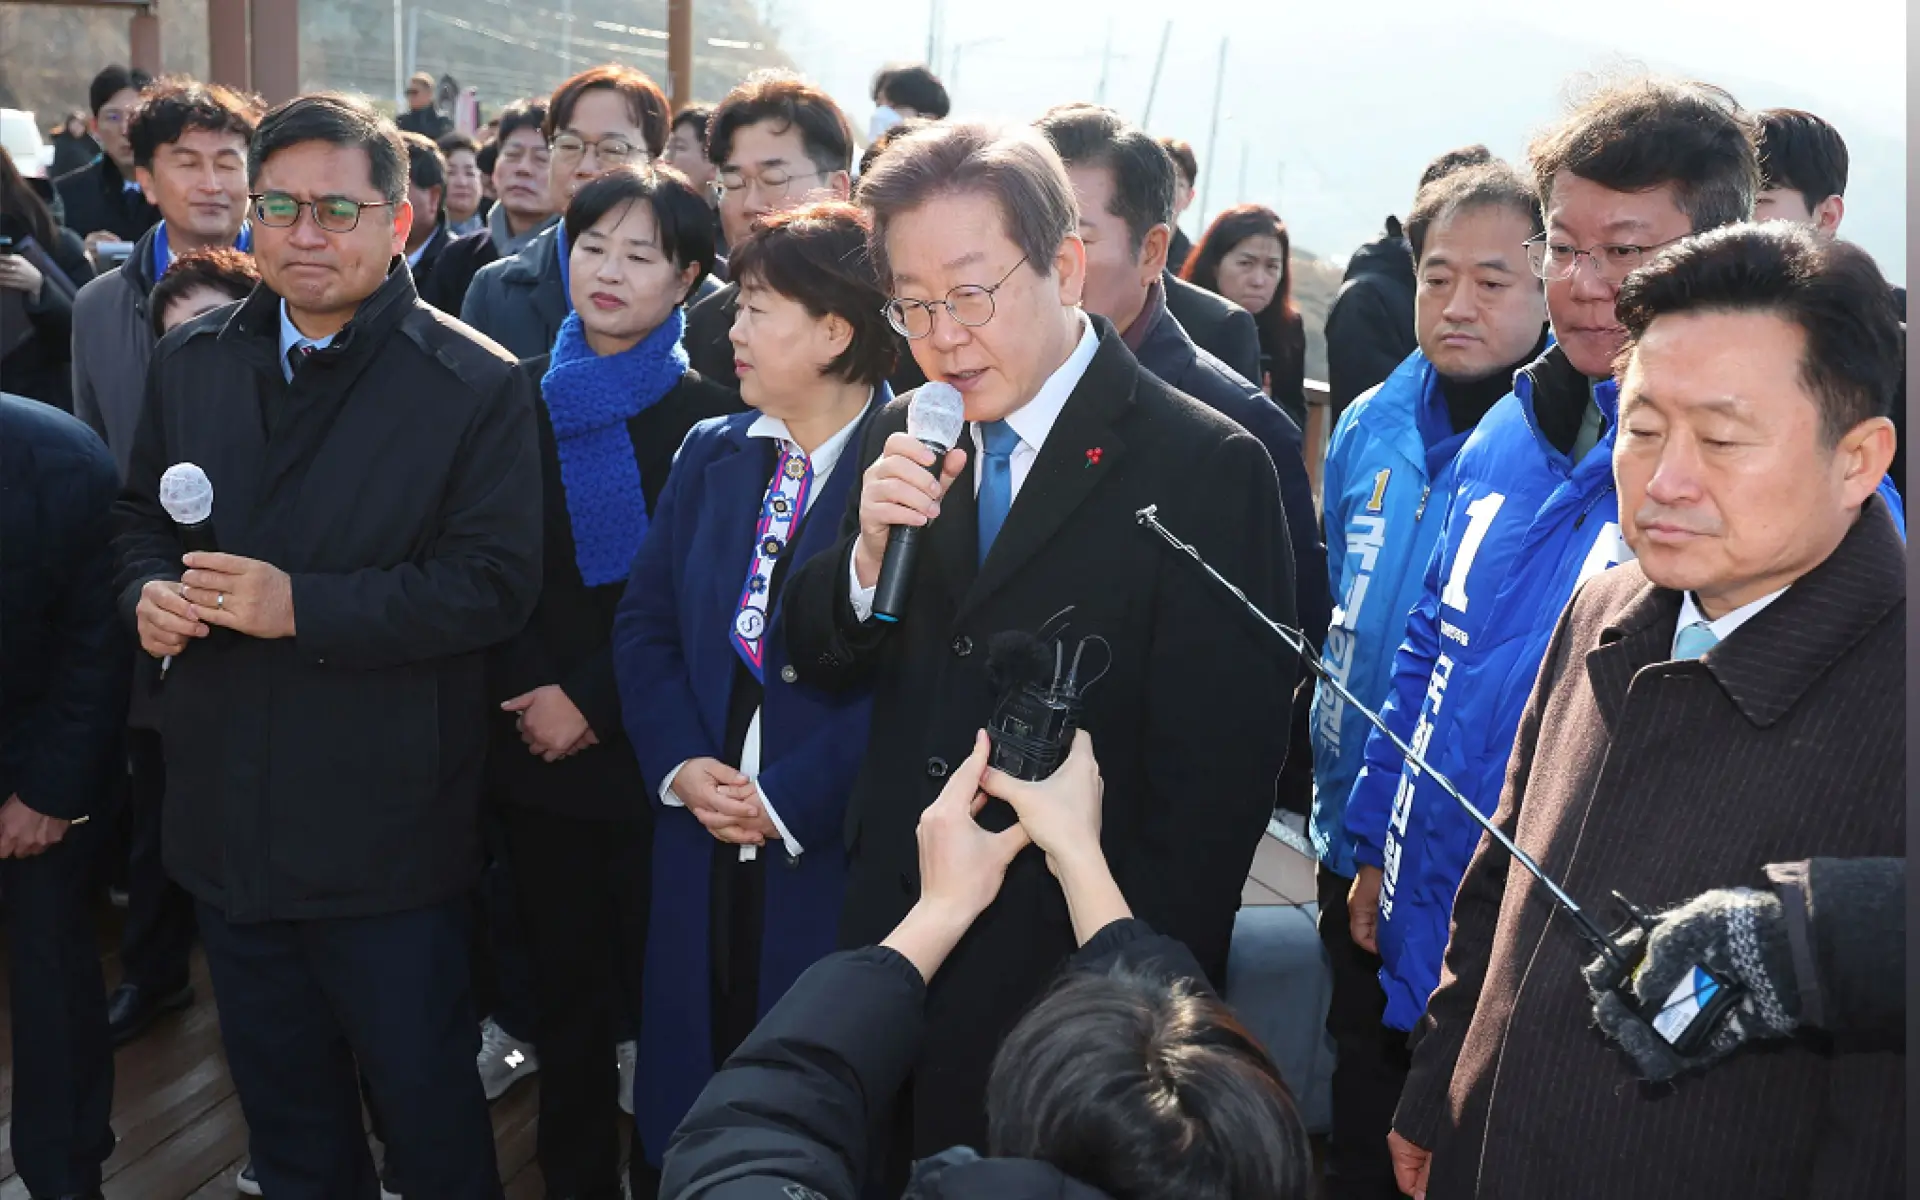 An opposition leader in South Korea is conscious after suffering a neck stab wound